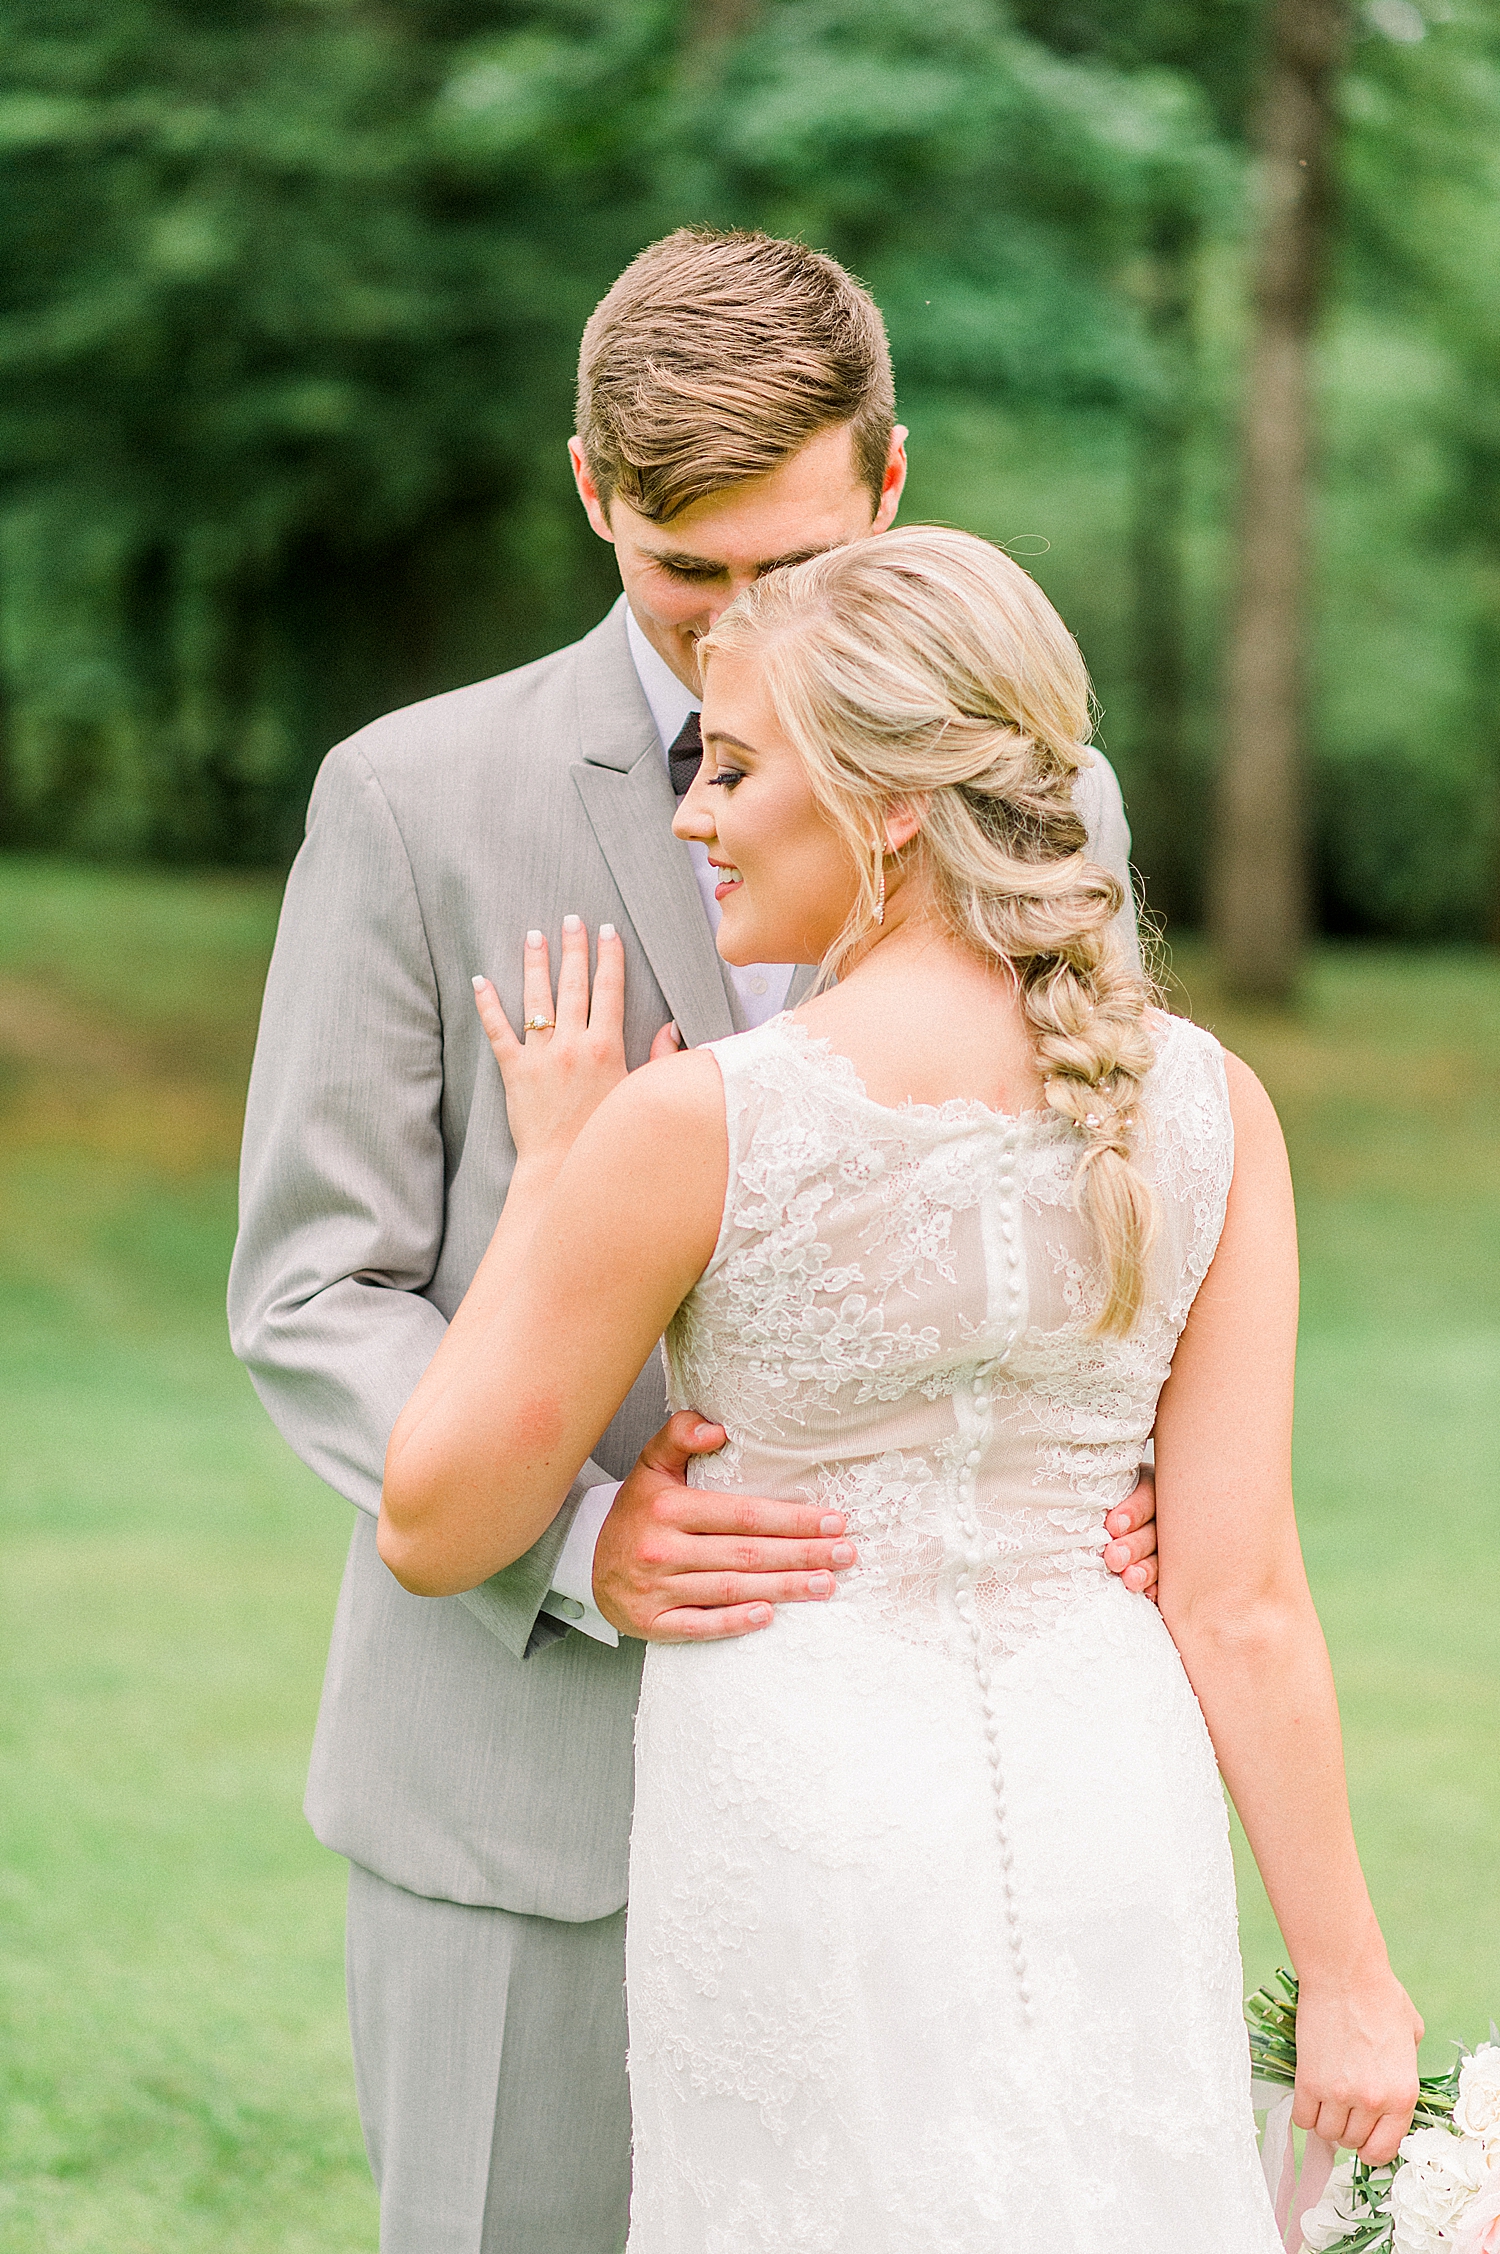 Creekside Meadows wedding portraits with bride showing off lace on wedding gown